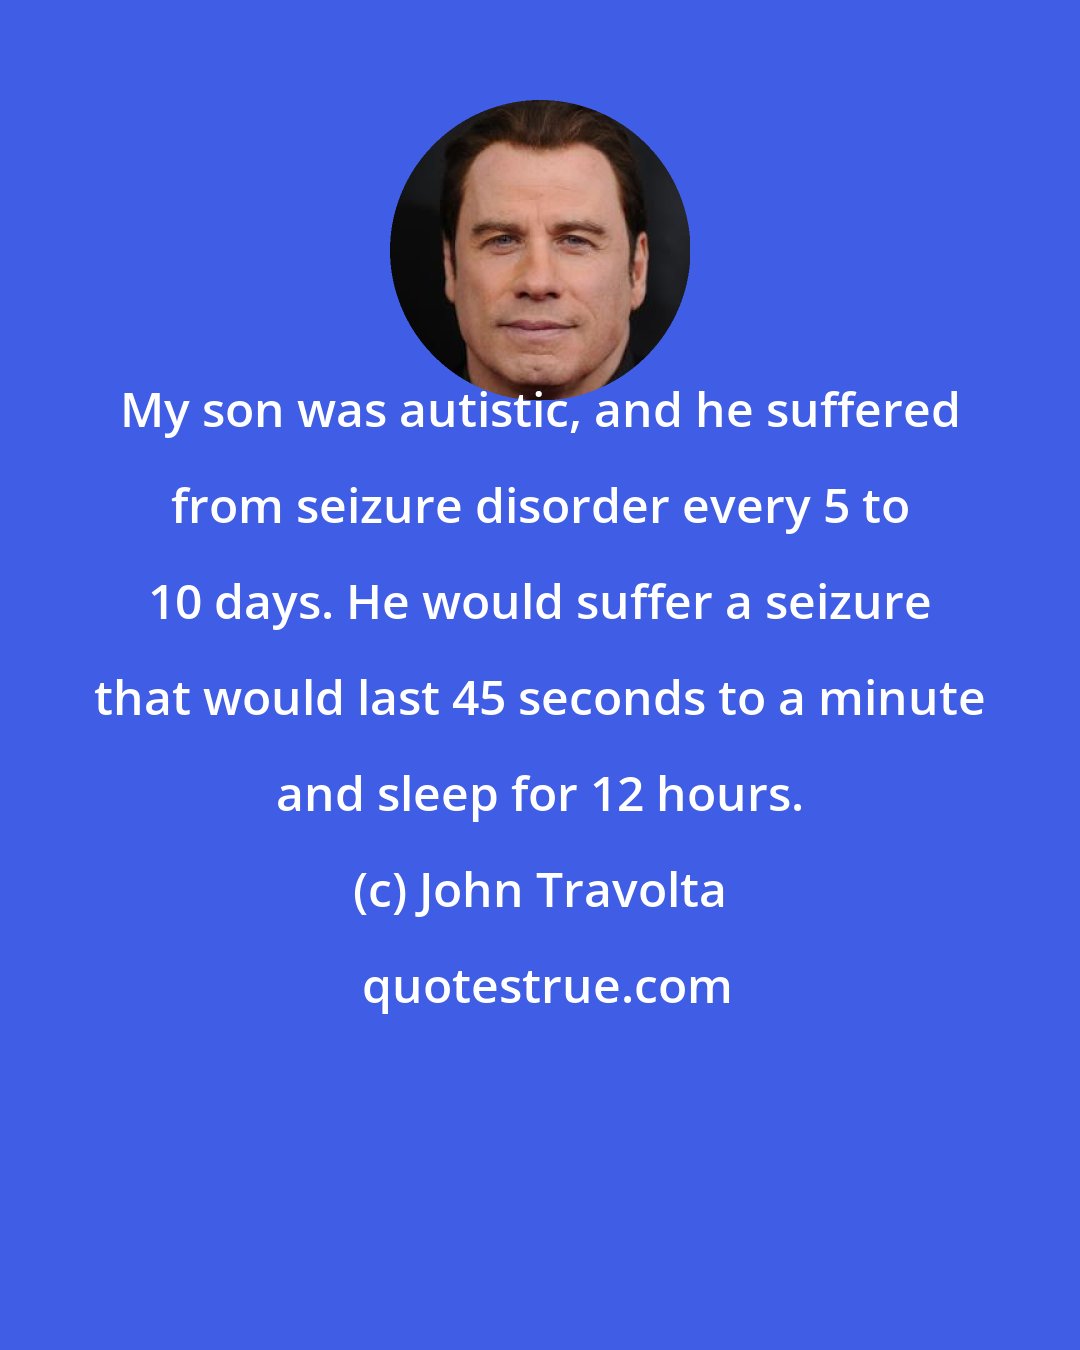 John Travolta: My son was autistic, and he suffered from seizure disorder every 5 to 10 days. He would suffer a seizure that would last 45 seconds to a minute and sleep for 12 hours.